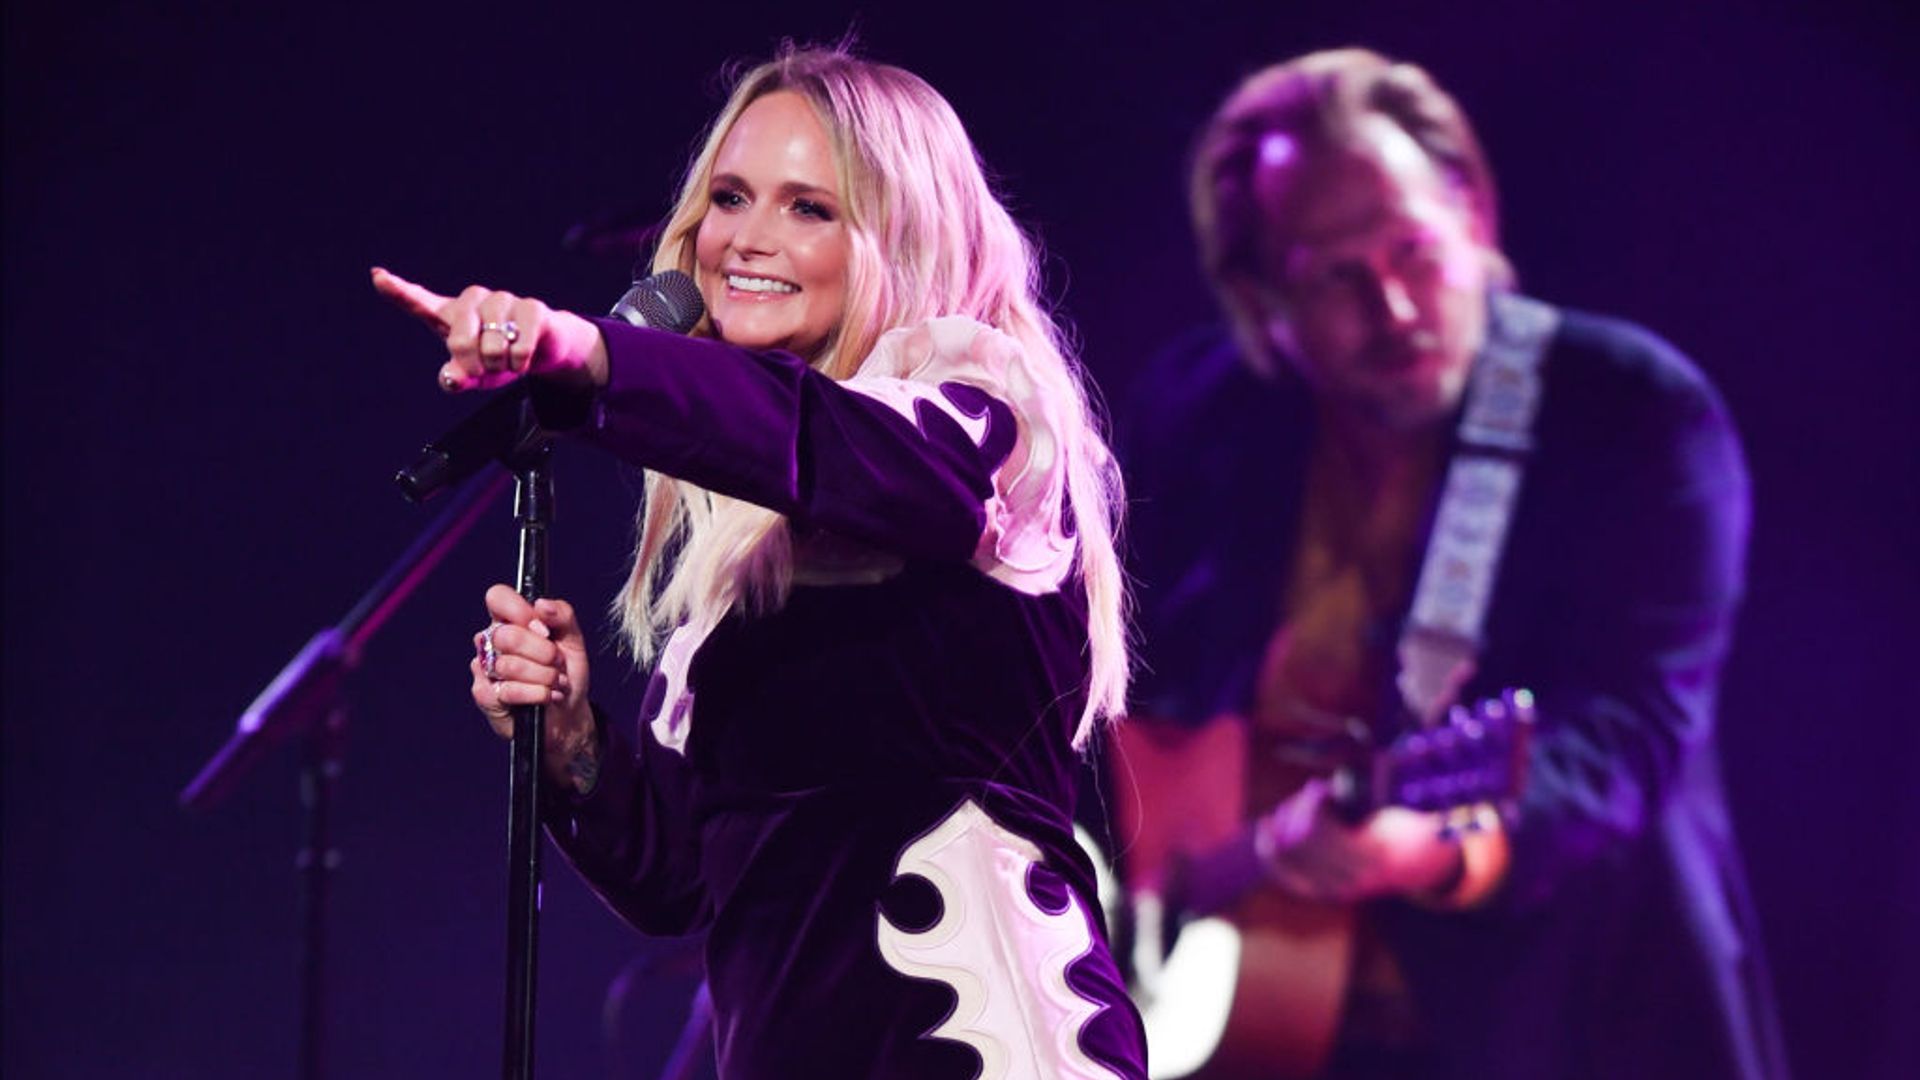 Miranda Lambert performs on stage at the 54th Annual CMA Awards